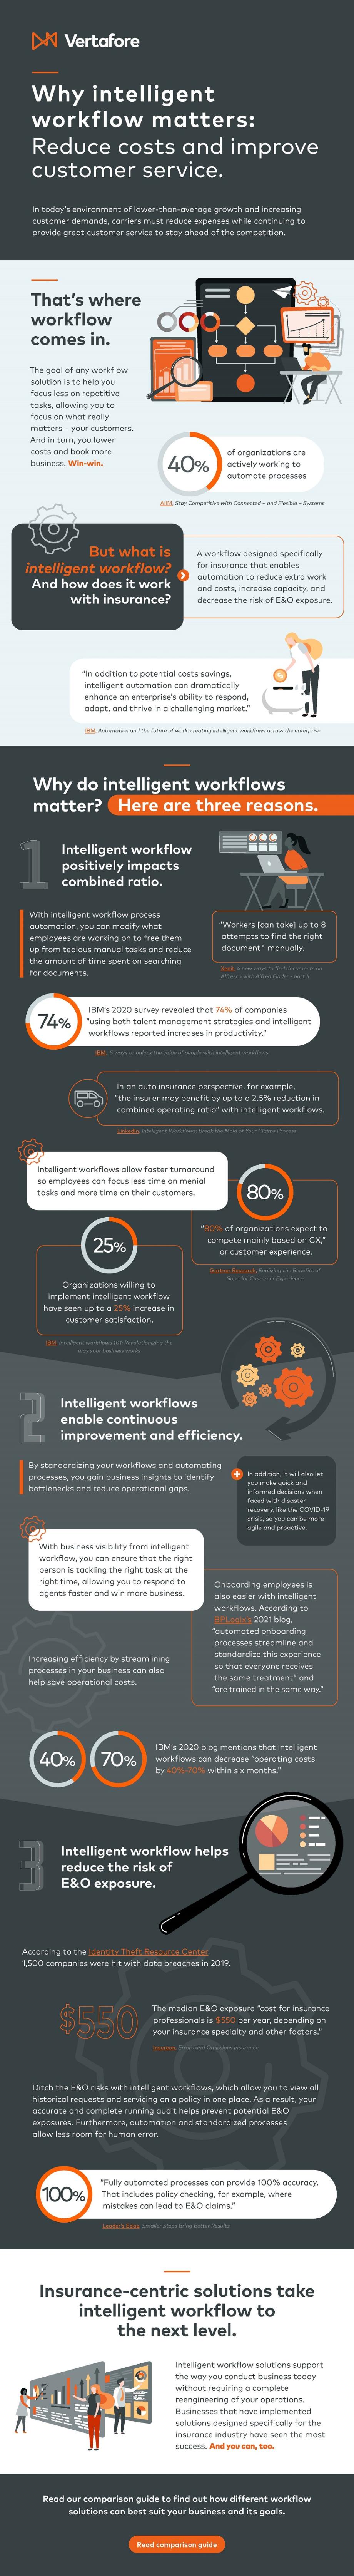 Why Intelligent Workflow Matters infographic